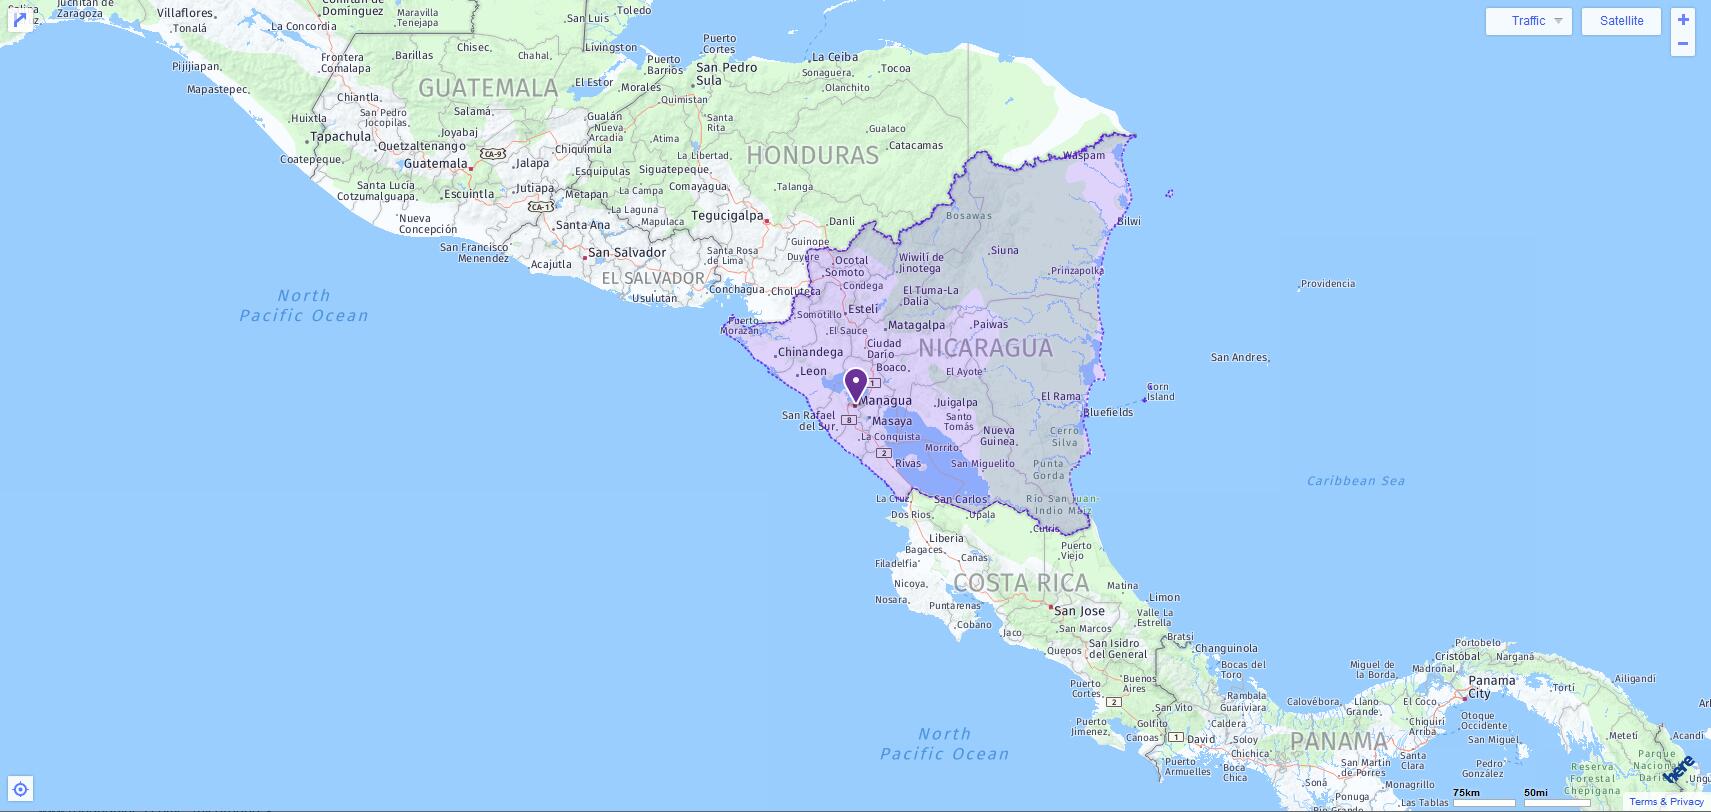 ACT Test Centers and Dates in Nicaragua